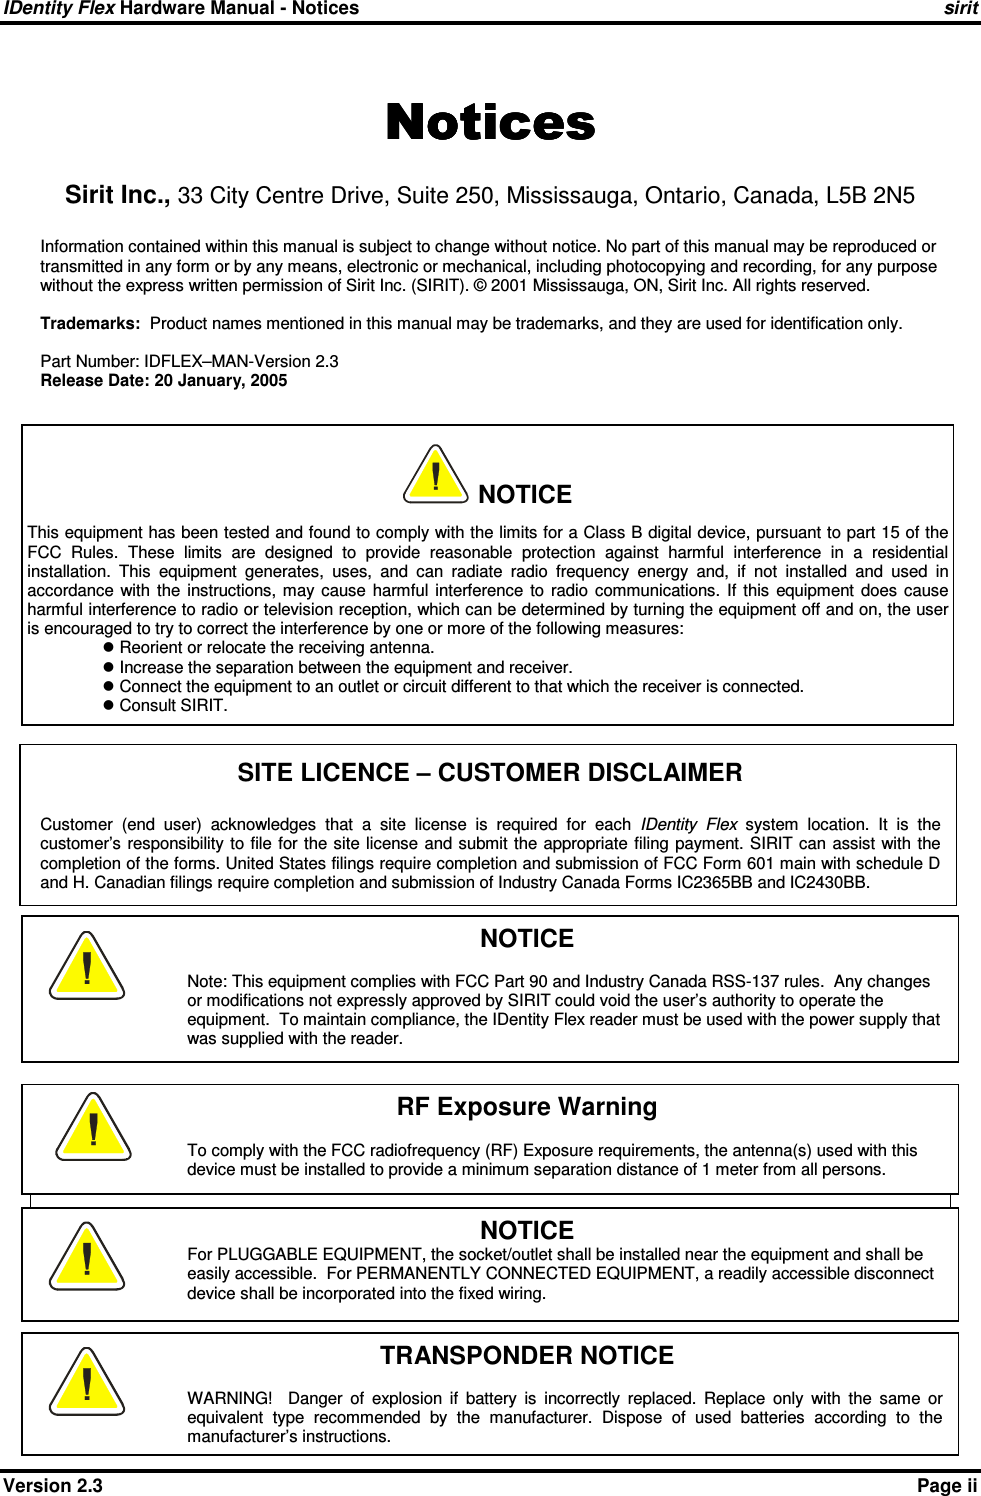 IDentity Flex Hardware Manual - Notices    sirit    Version 2.3    Page ii NoticesNoticesNoticesNotices    Sirit Inc., 33 City Centre Drive, Suite 250, Mississauga, Ontario, Canada, L5B 2N5  Information contained within this manual is subject to change without notice. No part of this manual may be reproduced or transmitted in any form or by any means, electronic or mechanical, including photocopying and recording, for any purpose without the express written permission of Sirit Inc. (SIRIT). © 2001 Mississauga, ON, Sirit Inc. All rights reserved.   Trademarks:  Product names mentioned in this manual may be trademarks, and they are used for identification only.  Part Number: IDFLEX–MAN-Version 2.3 Release Date: 20 January, 2005   SITE LICENCE – CUSTOMER DISCLAIMER  Customer  (end  user)  acknowledges  that  a  site  license  is  required  for  each  IDentity  Flex  system  location.  It  is  the customer’s responsibility to file  for the site license  and submit the appropriate  filing payment. SIRIT can assist with  the completion of the forms. United States filings require completion and submission of FCC Form 601 main with schedule D and H. Canadian filings require completion and submission of Industry Canada Forms IC2365BB and IC2430BB.                   WARNING – ON-BOARD BATTERY     NOTICE For PLUGGABLE EQUIPMENT, the socket/outlet shall be installed near the equipment and shall be easily accessible.  For PERMANENTLY CONNECTED EQUIPMENT, a readily accessible disconnect device shall be incorporated into the fixed wiring.     NOTICE  This equipment has been tested and found to comply with the limits for a Class B digital device, pursuant to part 15 of the FCC  Rules.  These  limits  are  designed  to  provide  reasonable  protection  against  harmful  interference  in  a  residential installation.  This  equipment  generates,  uses,  and  can  radiate  radio  frequency  energy  and,  if  not  installed  and  used  in accordance  with  the  instructions, may  cause  harmful  interference  to  radio  communications.  If  this  equipment  does  cause harmful interference to radio or television reception, which can be determined by turning the equipment off and on, the user is encouraged to try to correct the interference by one or more of the following measures:  Reorient or relocate the receiving antenna.  Increase the separation between the equipment and receiver.  Connect the equipment to an outlet or circuit different to that which the receiver is connected.  Consult SIRIT. RF Exposure Warning  To comply with the FCC radiofrequency (RF) Exposure requirements, the antenna(s) used with this device must be installed to provide a minimum separation distance of 1 meter from all persons.  NOTICE  Note: This equipment complies with FCC Part 90 and Industry Canada RSS-137 rules.  Any changes or modifications not expressly approved by SIRIT could void the user’s authority to operate the equipment.  To maintain compliance, the IDentity Flex reader must be used with the power supply that was supplied with the reader.  TRANSPONDER NOTICE  WARNING!    Danger  of  explosion  if  battery  is  incorrectly  replaced.  Replace  only  with  the  same  or equivalent  type  recommended  by  the  manufacturer.  Dispose  of  used  batteries  according  to  the manufacturer’s instructions.  